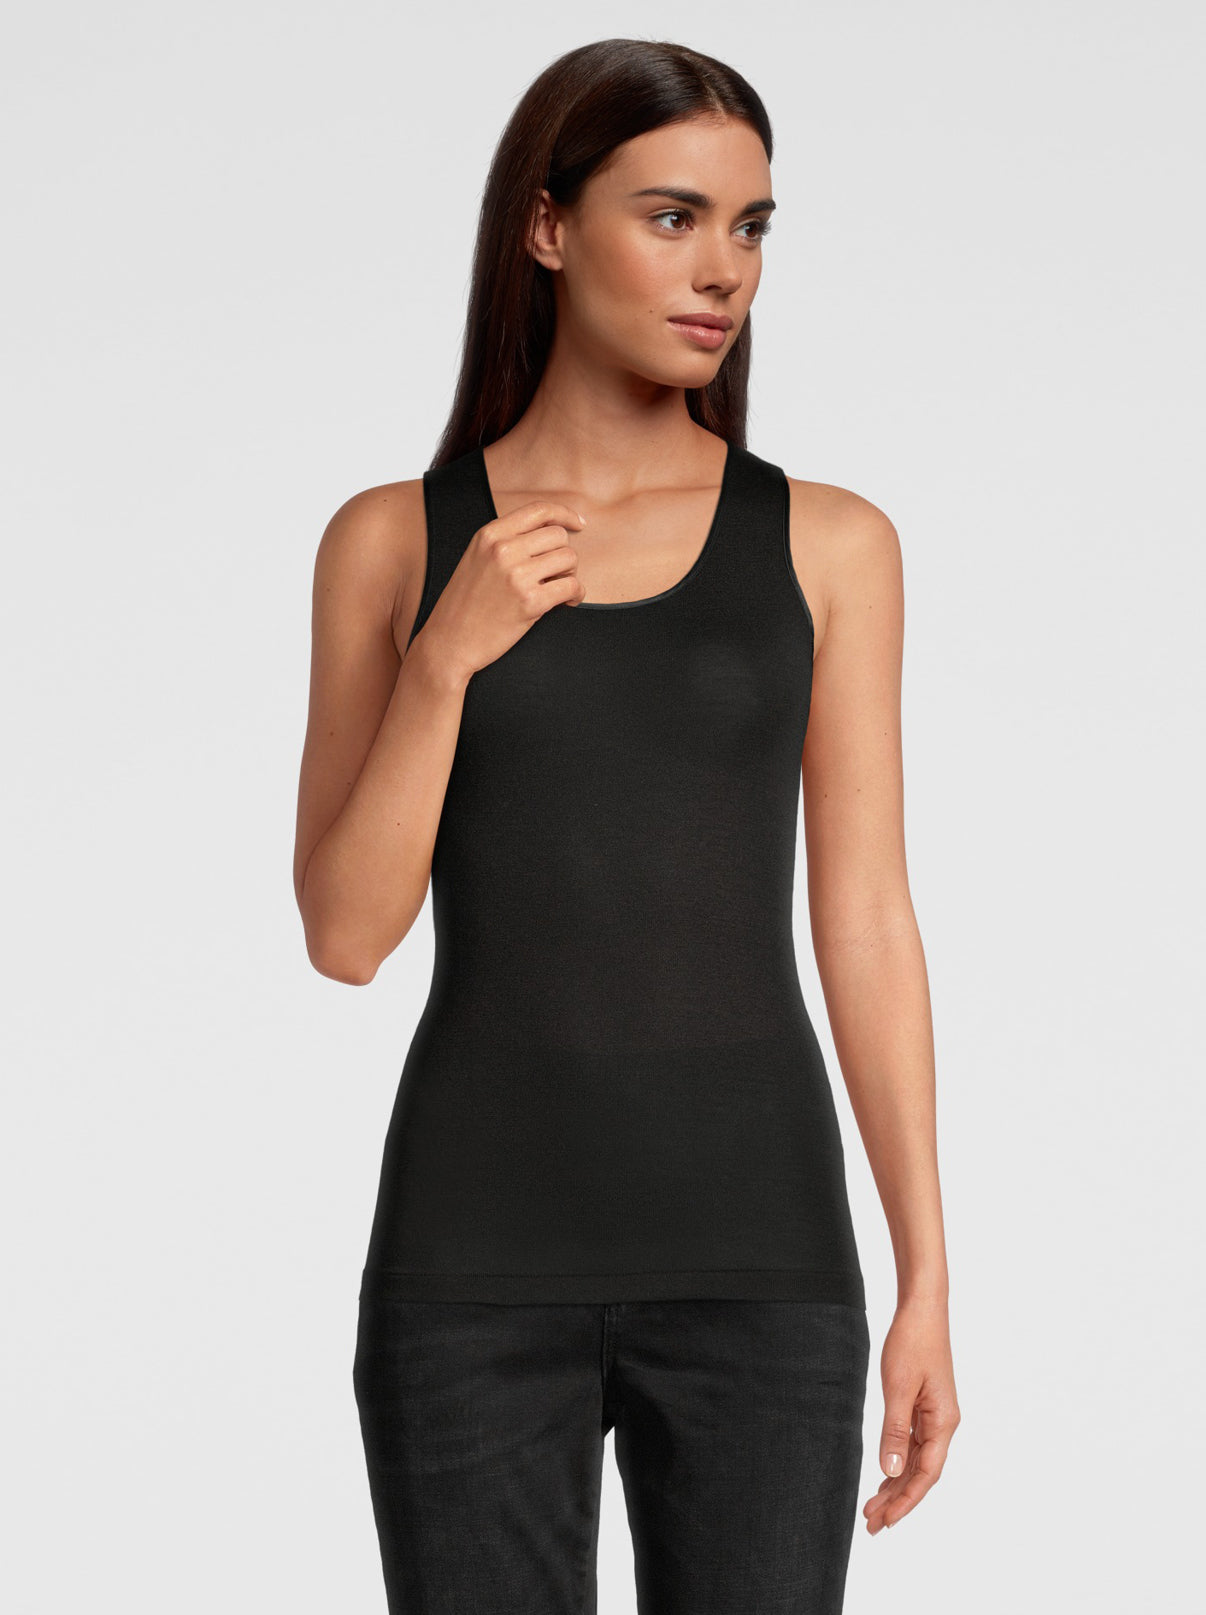 Tank Top Round Neck in Wool and Silk 3432 - Oscalito